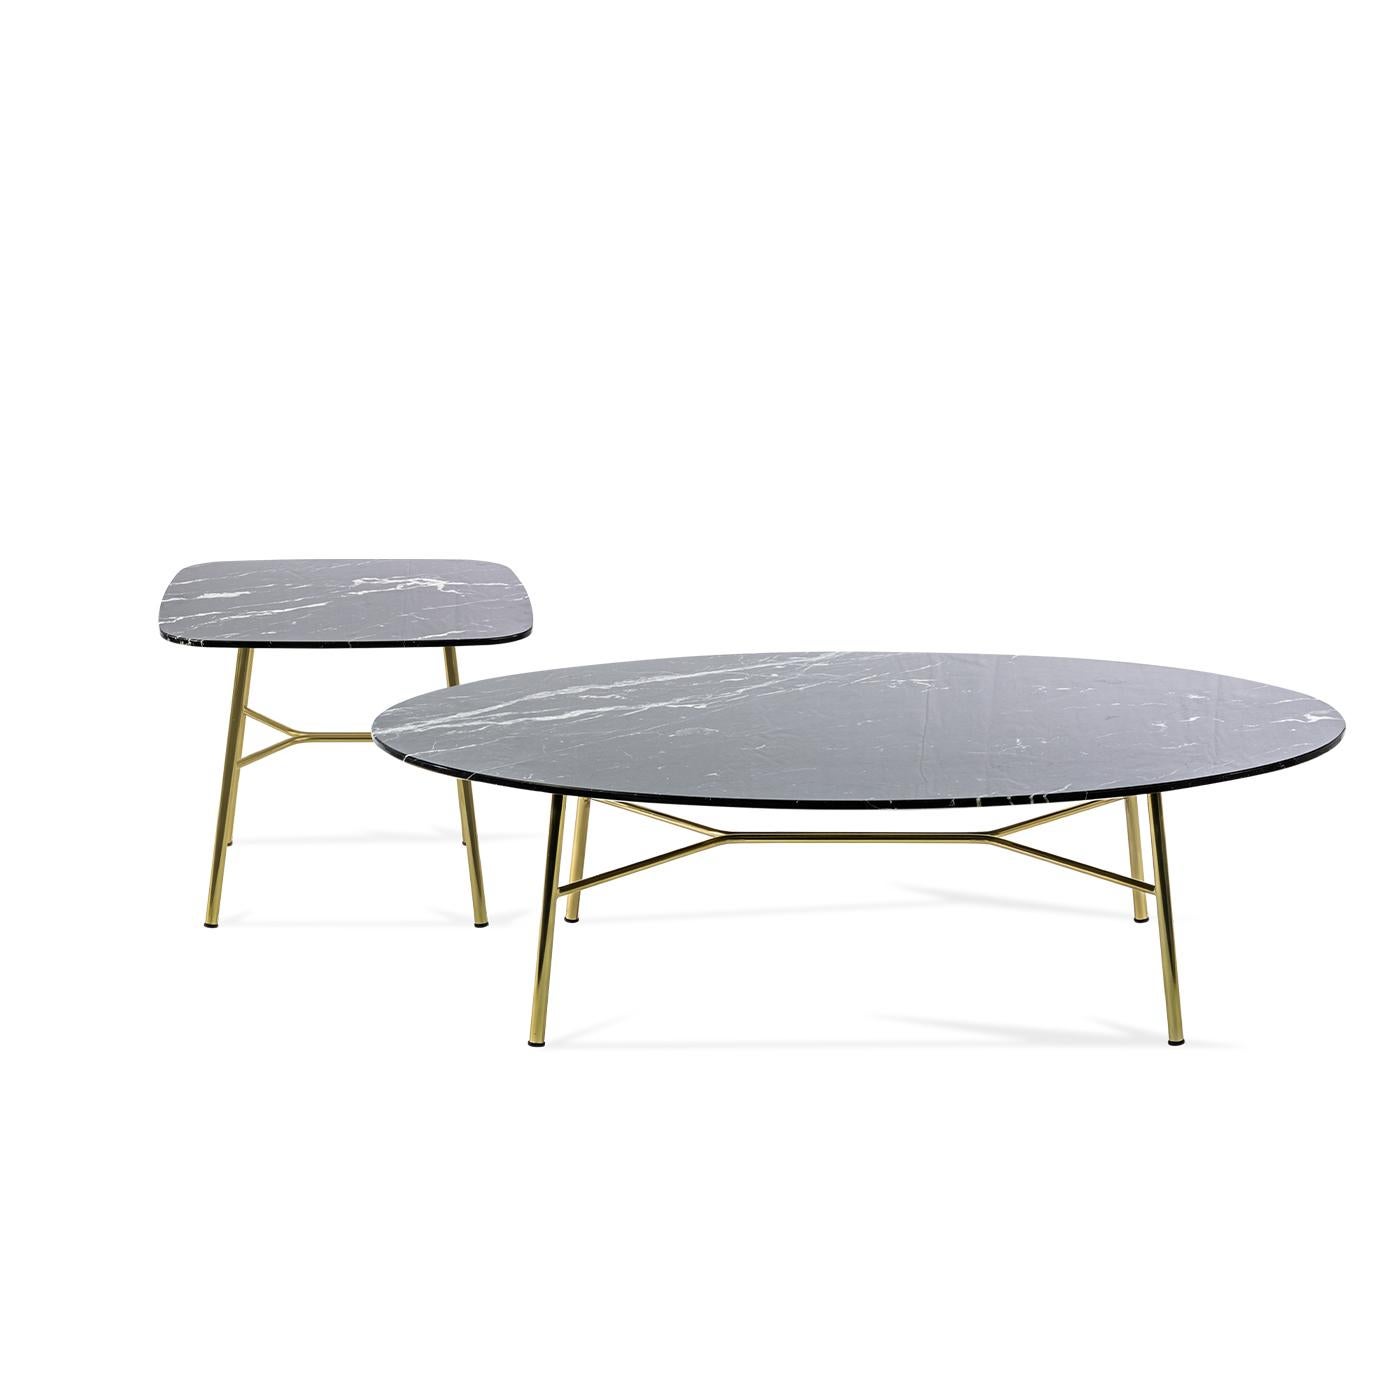 Boasting a fine Black Marquinia marble top set on a cylindrical metal base with a polished brass finish, this coffee table from the Yuki Collection brings timeless elegance and functionality to a modern living room or office lounge. Uniquely